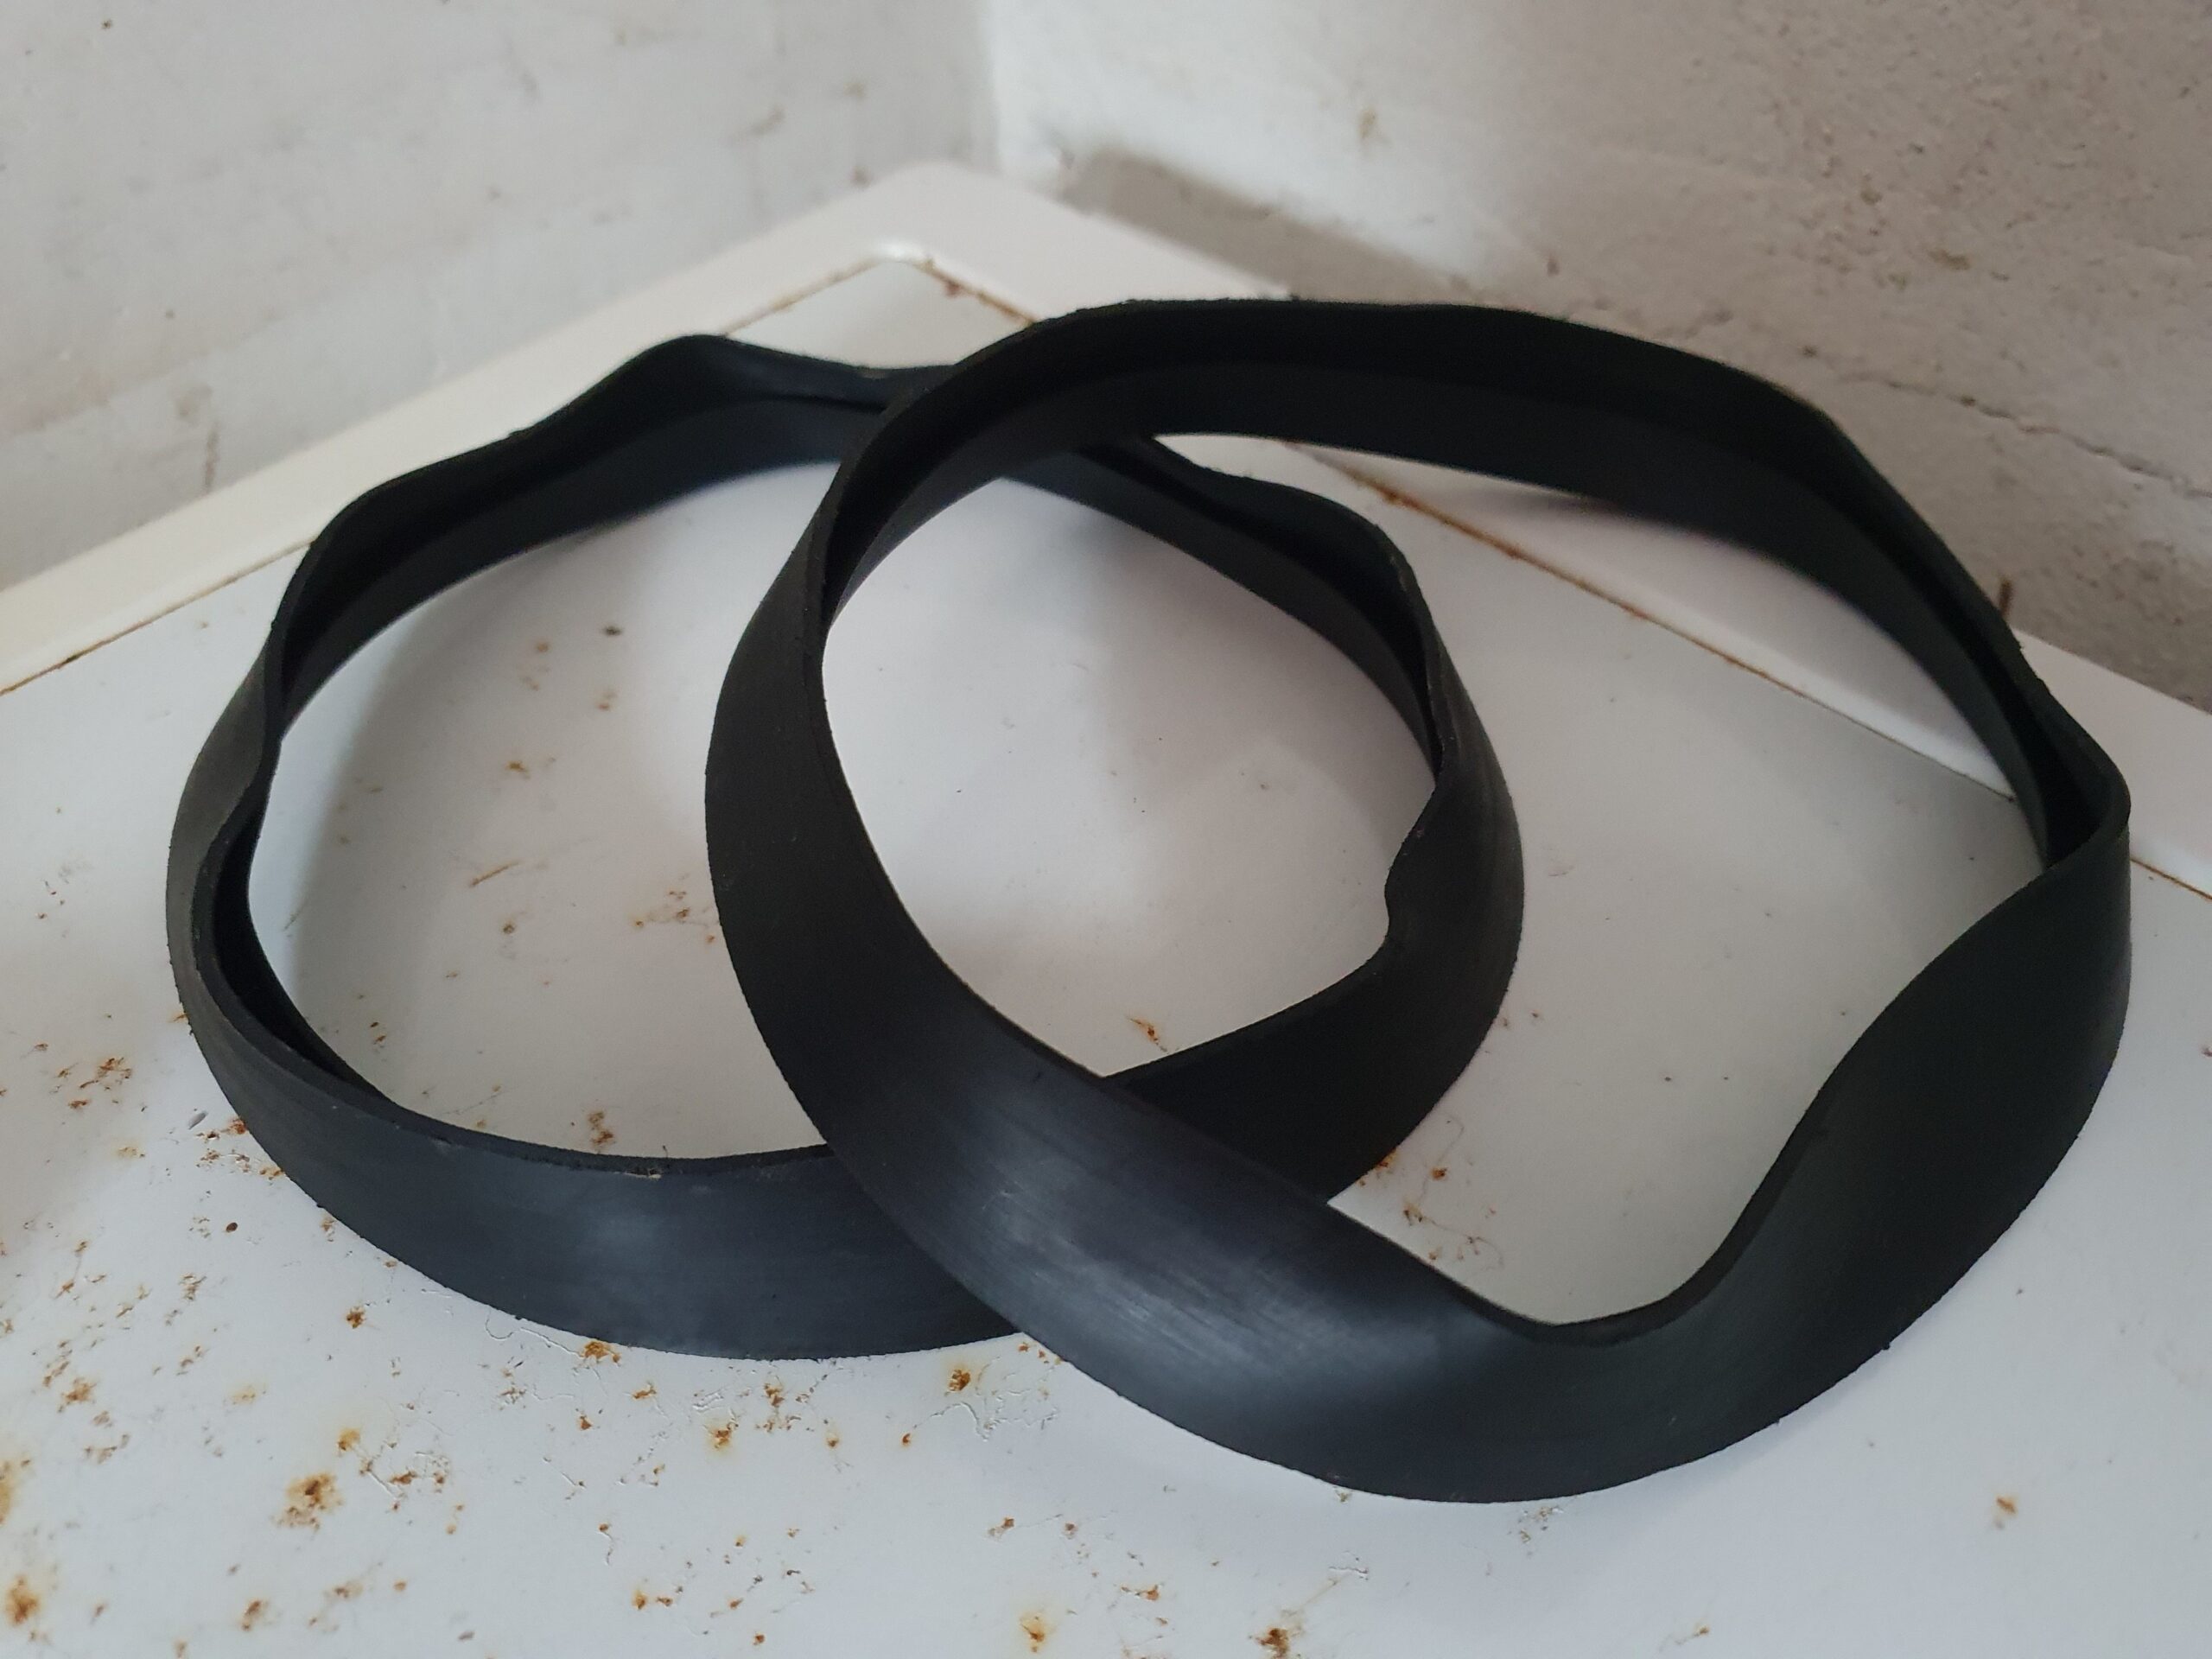 PARTS: New Rubber Seal for Globe necks